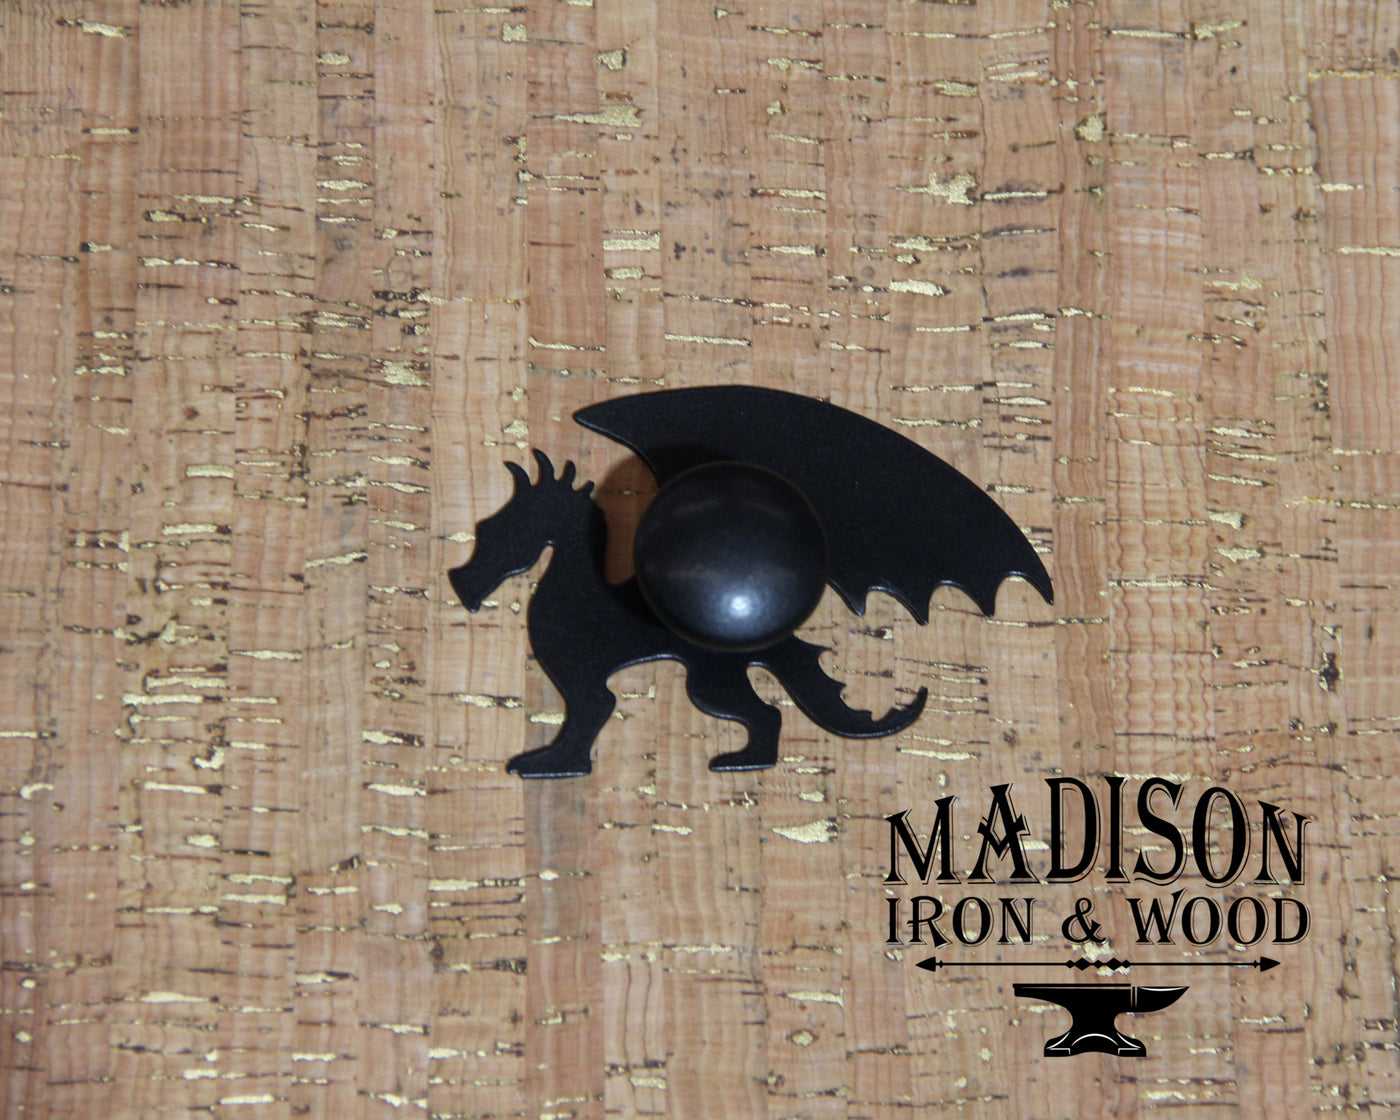 Dragon Cabinet Doorknob Decoration - Madison Iron and Wood - Door Handle Decoration - metal outdoor decor - Steel deocrations - american made products - veteran owned business products - fencing decorations - fencing supplies - custom wall decorations - personalized wall signs - steel - decorative post caps - steel post caps - metal post caps - brackets - structural brackets - home improvement - easter - easter decorations - easter gift - easter yard decor